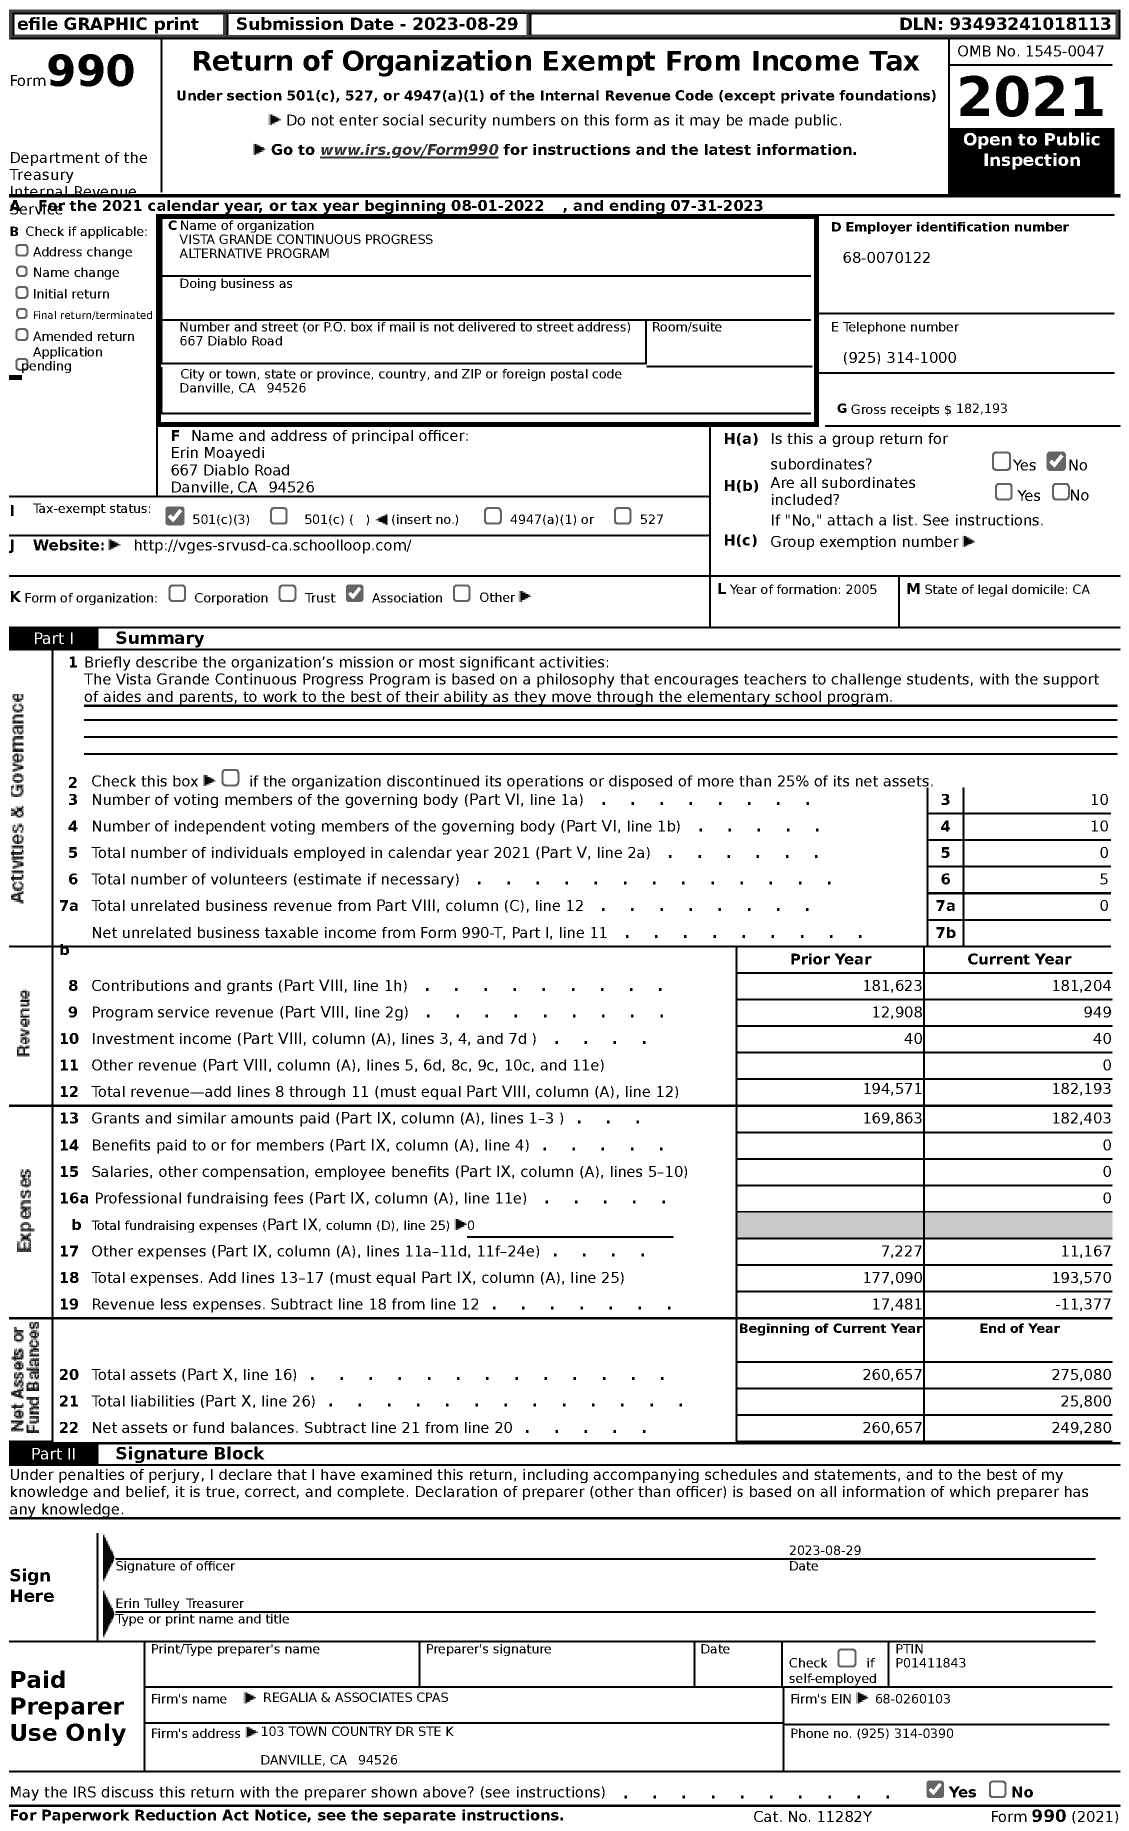 Image of first page of 2022 Form 990 for Vista Grande Continuous Progress Alternative Program